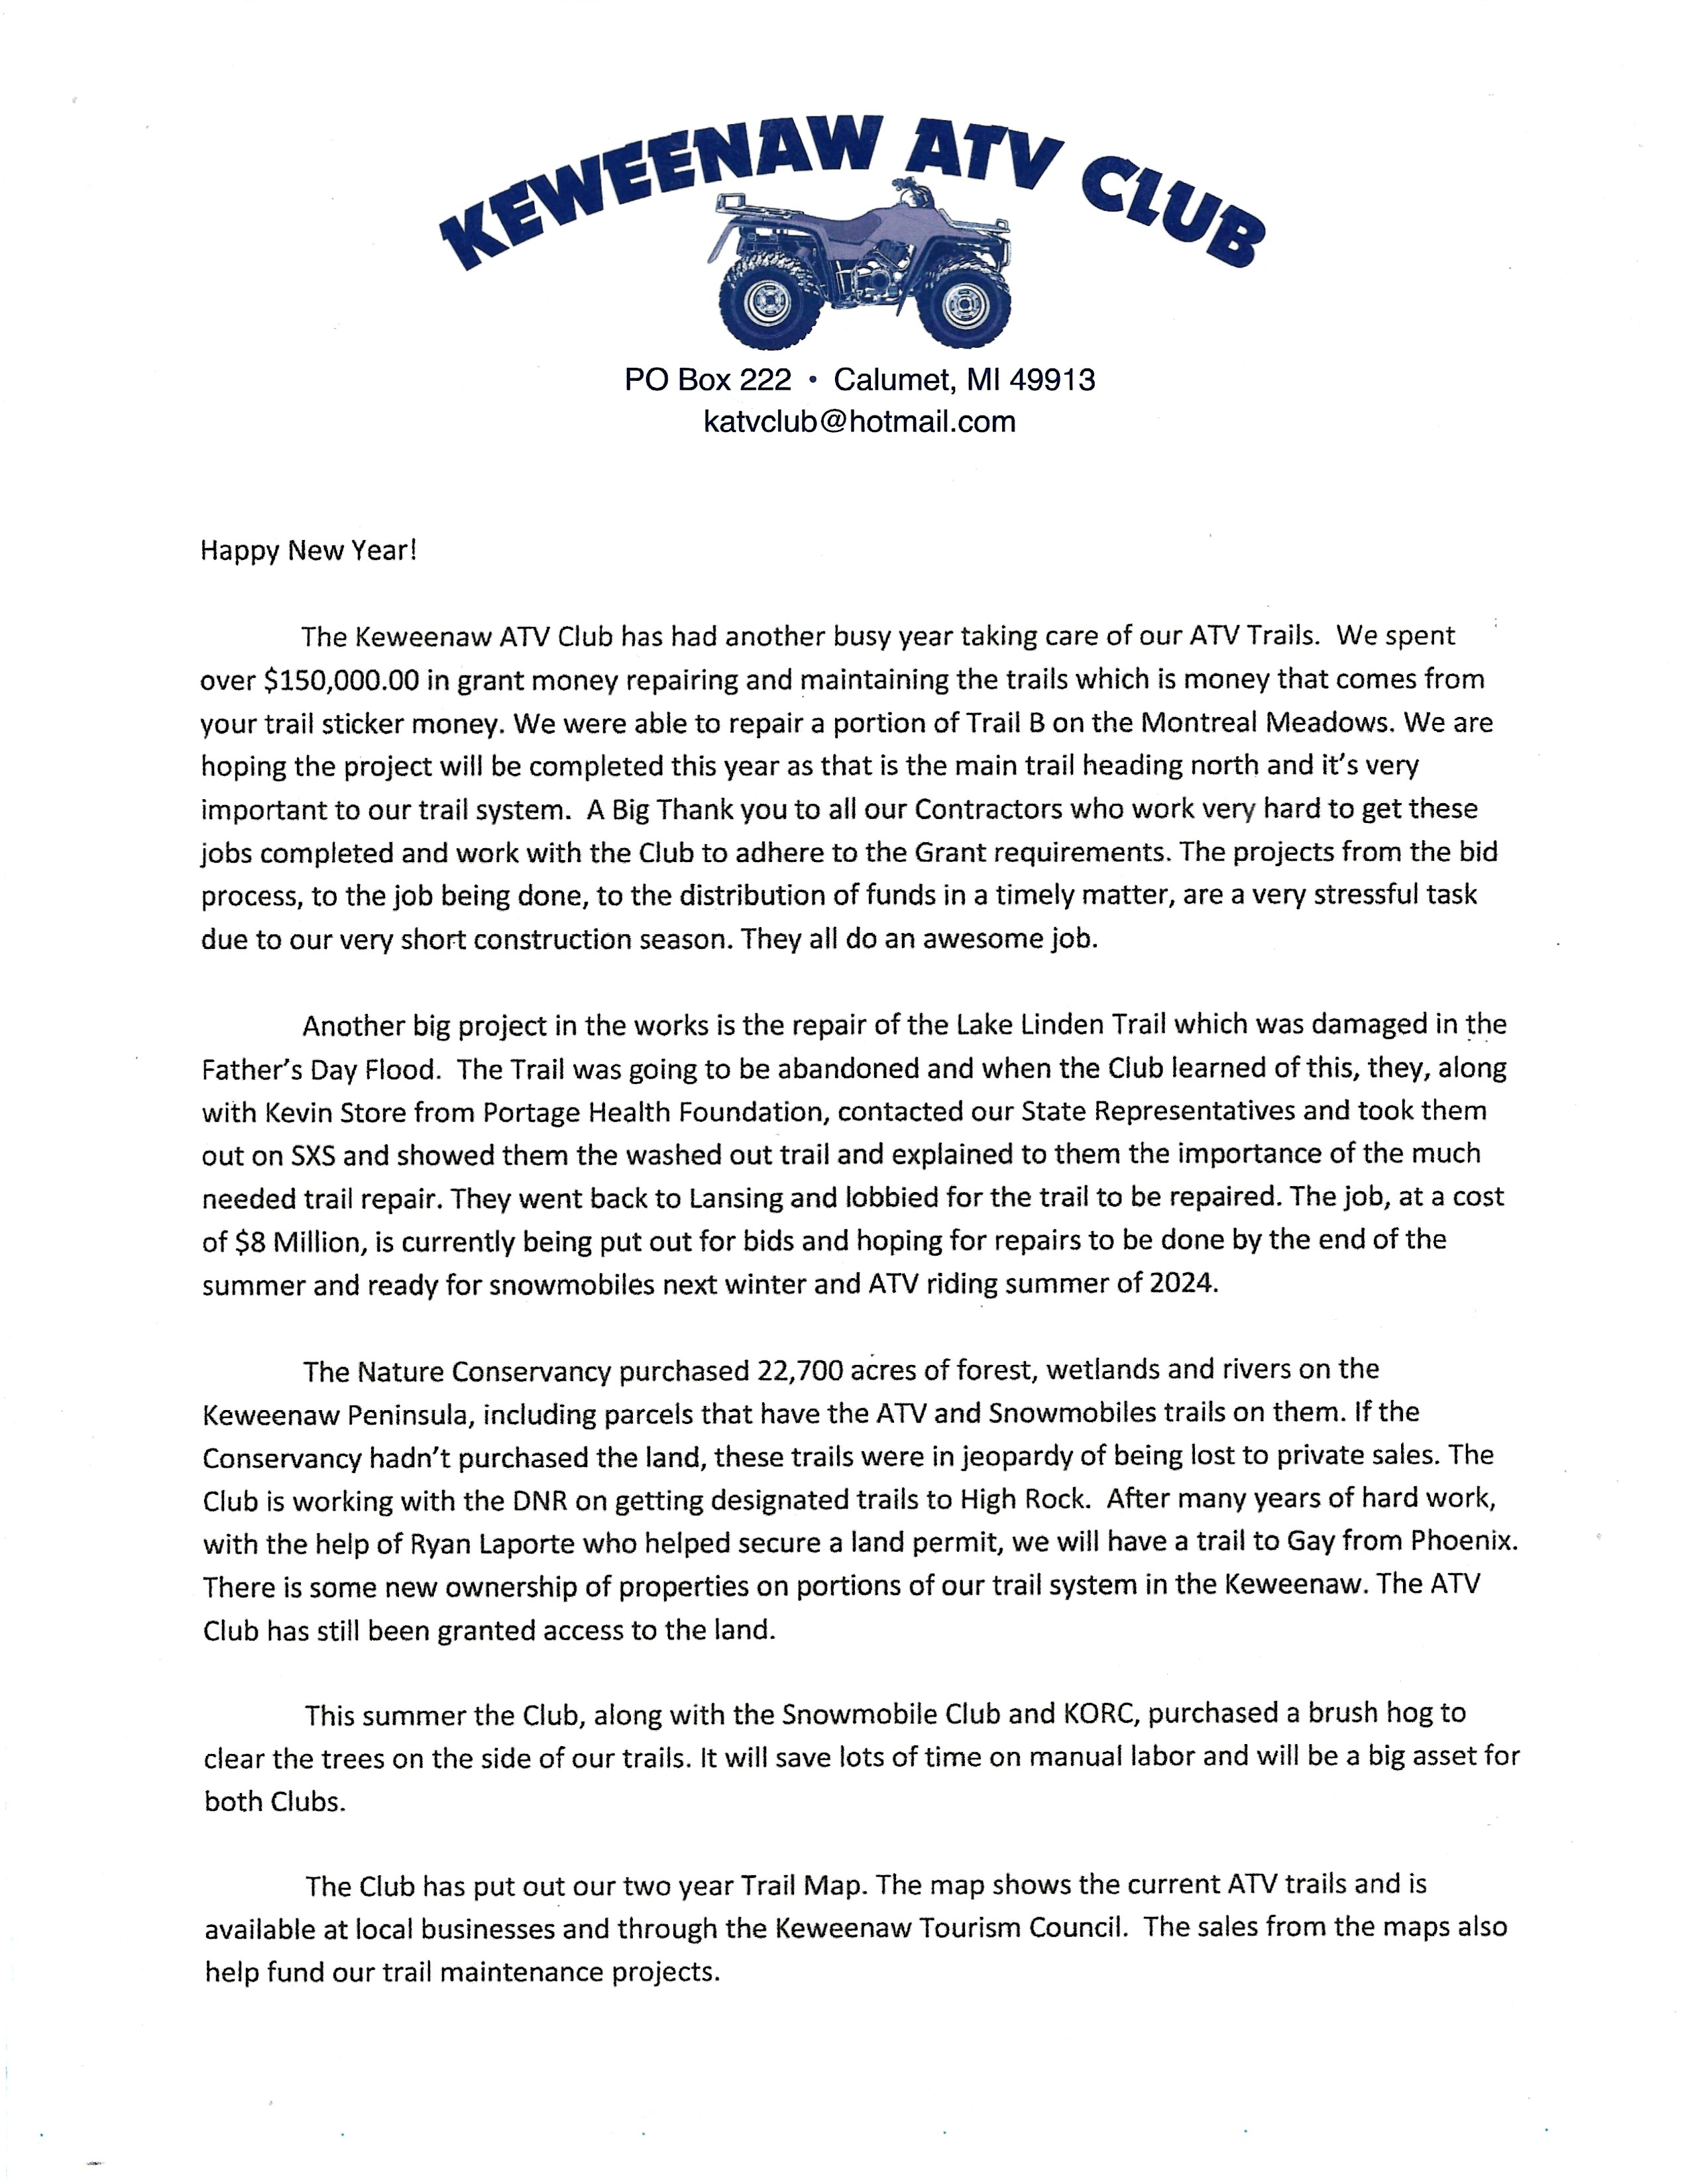 2022 Club Letter